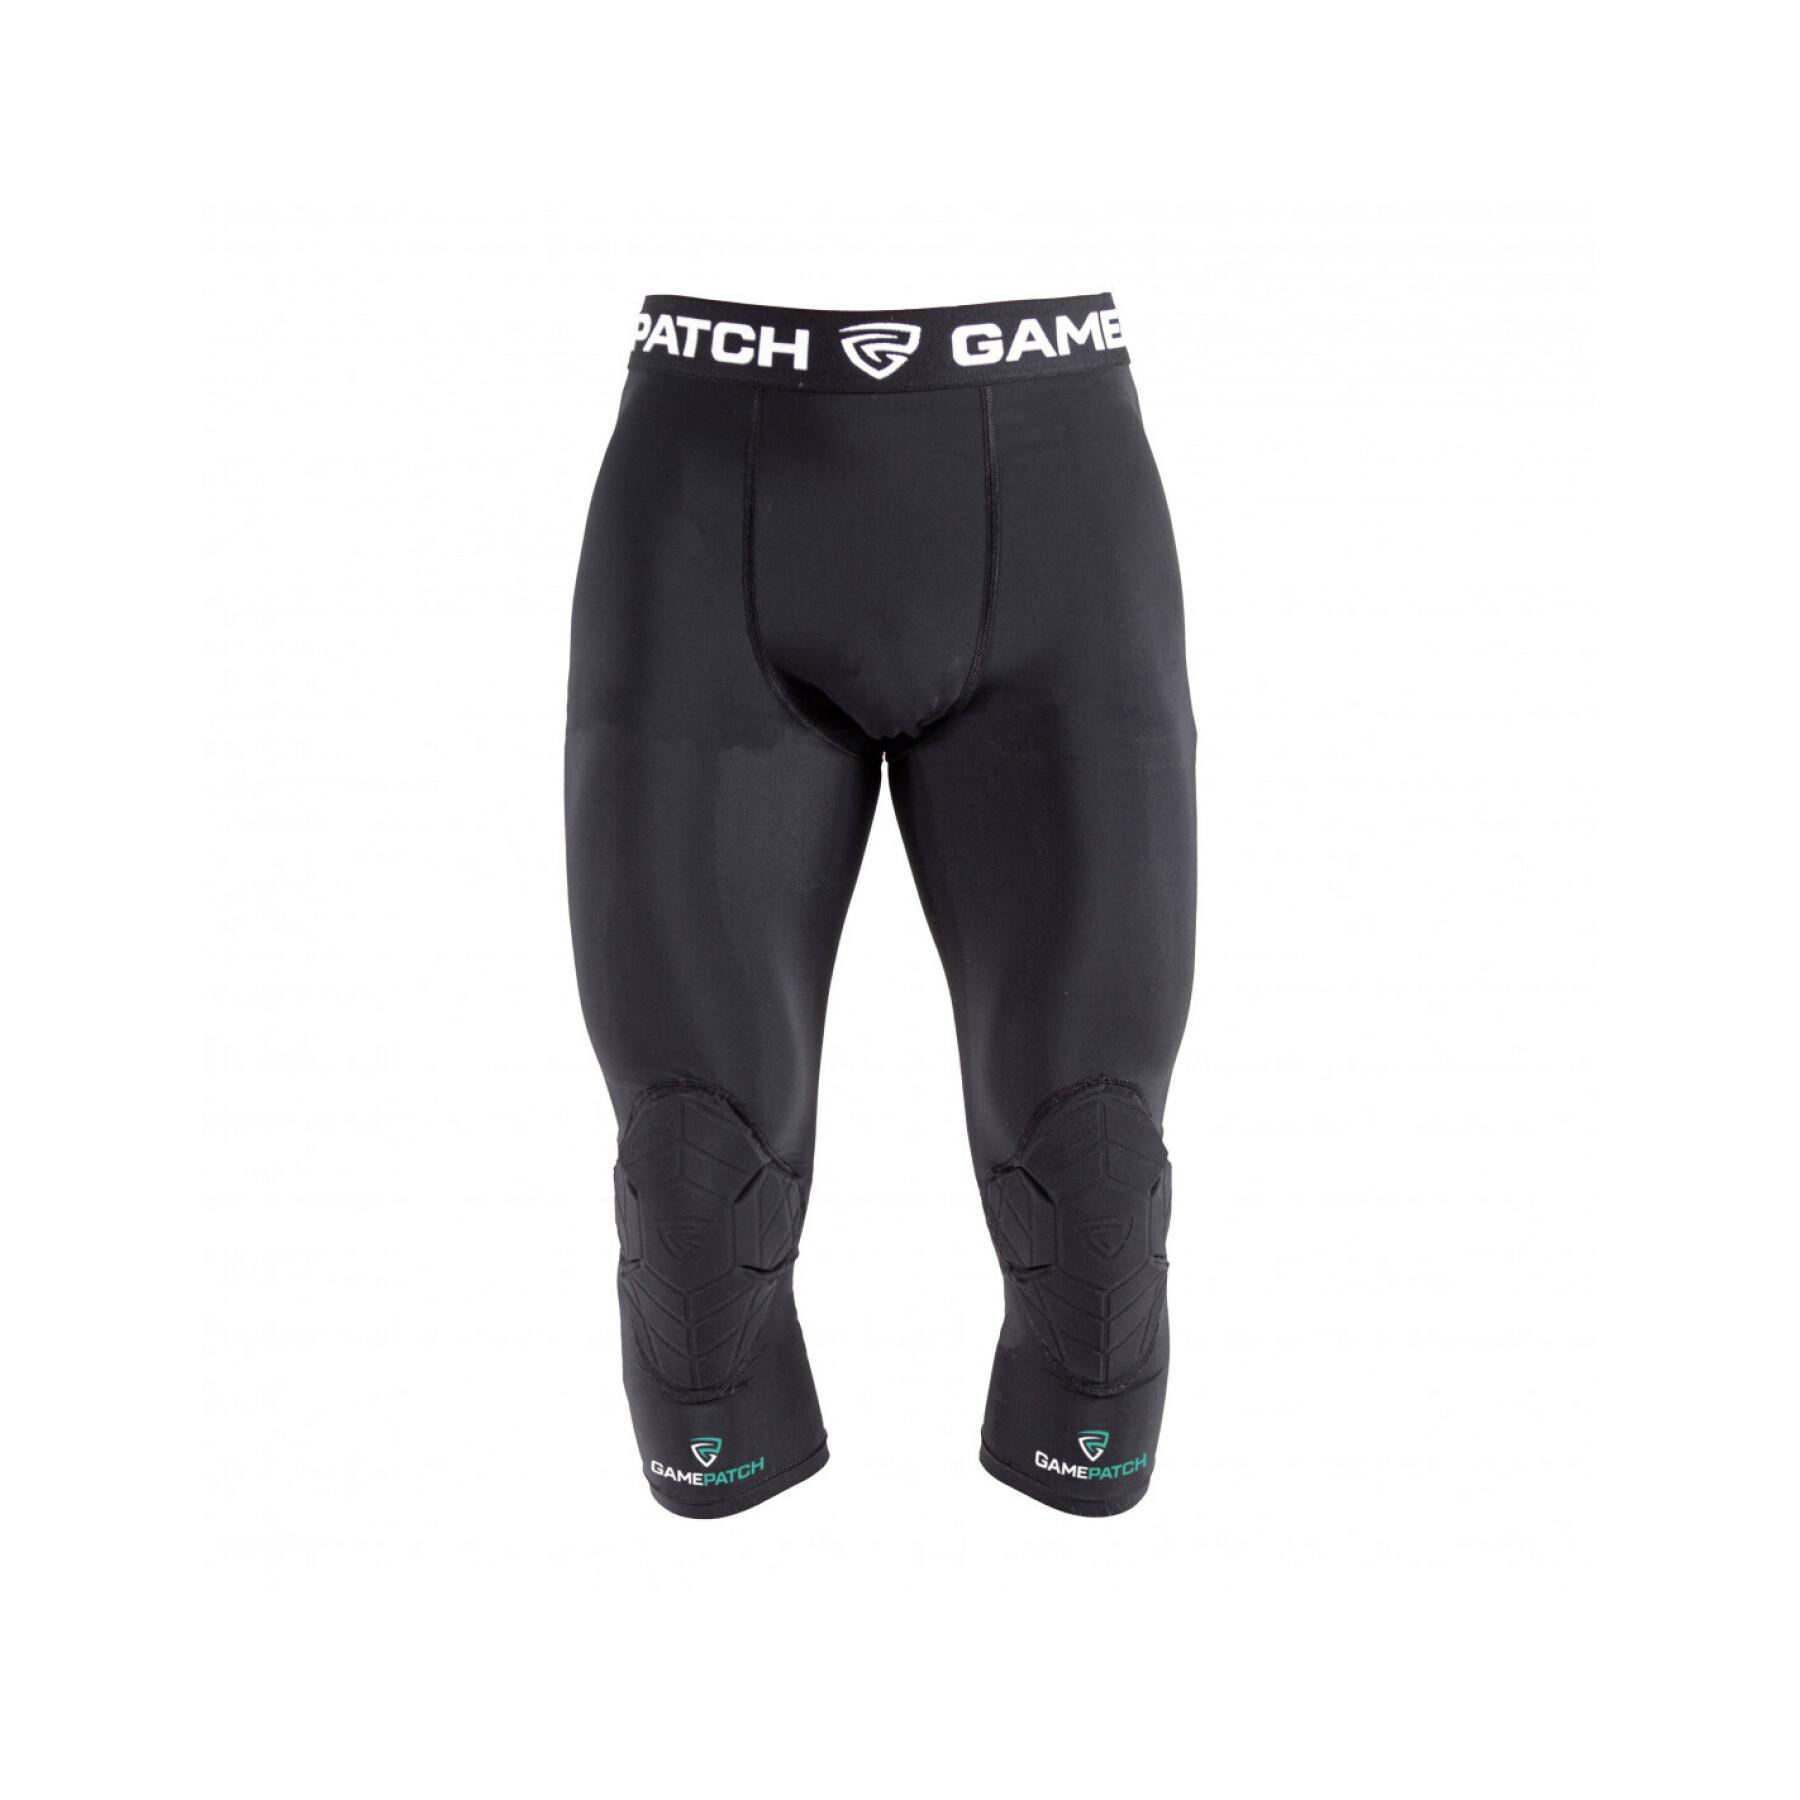 Protective pants 3/4 Game-Patch Full Knee